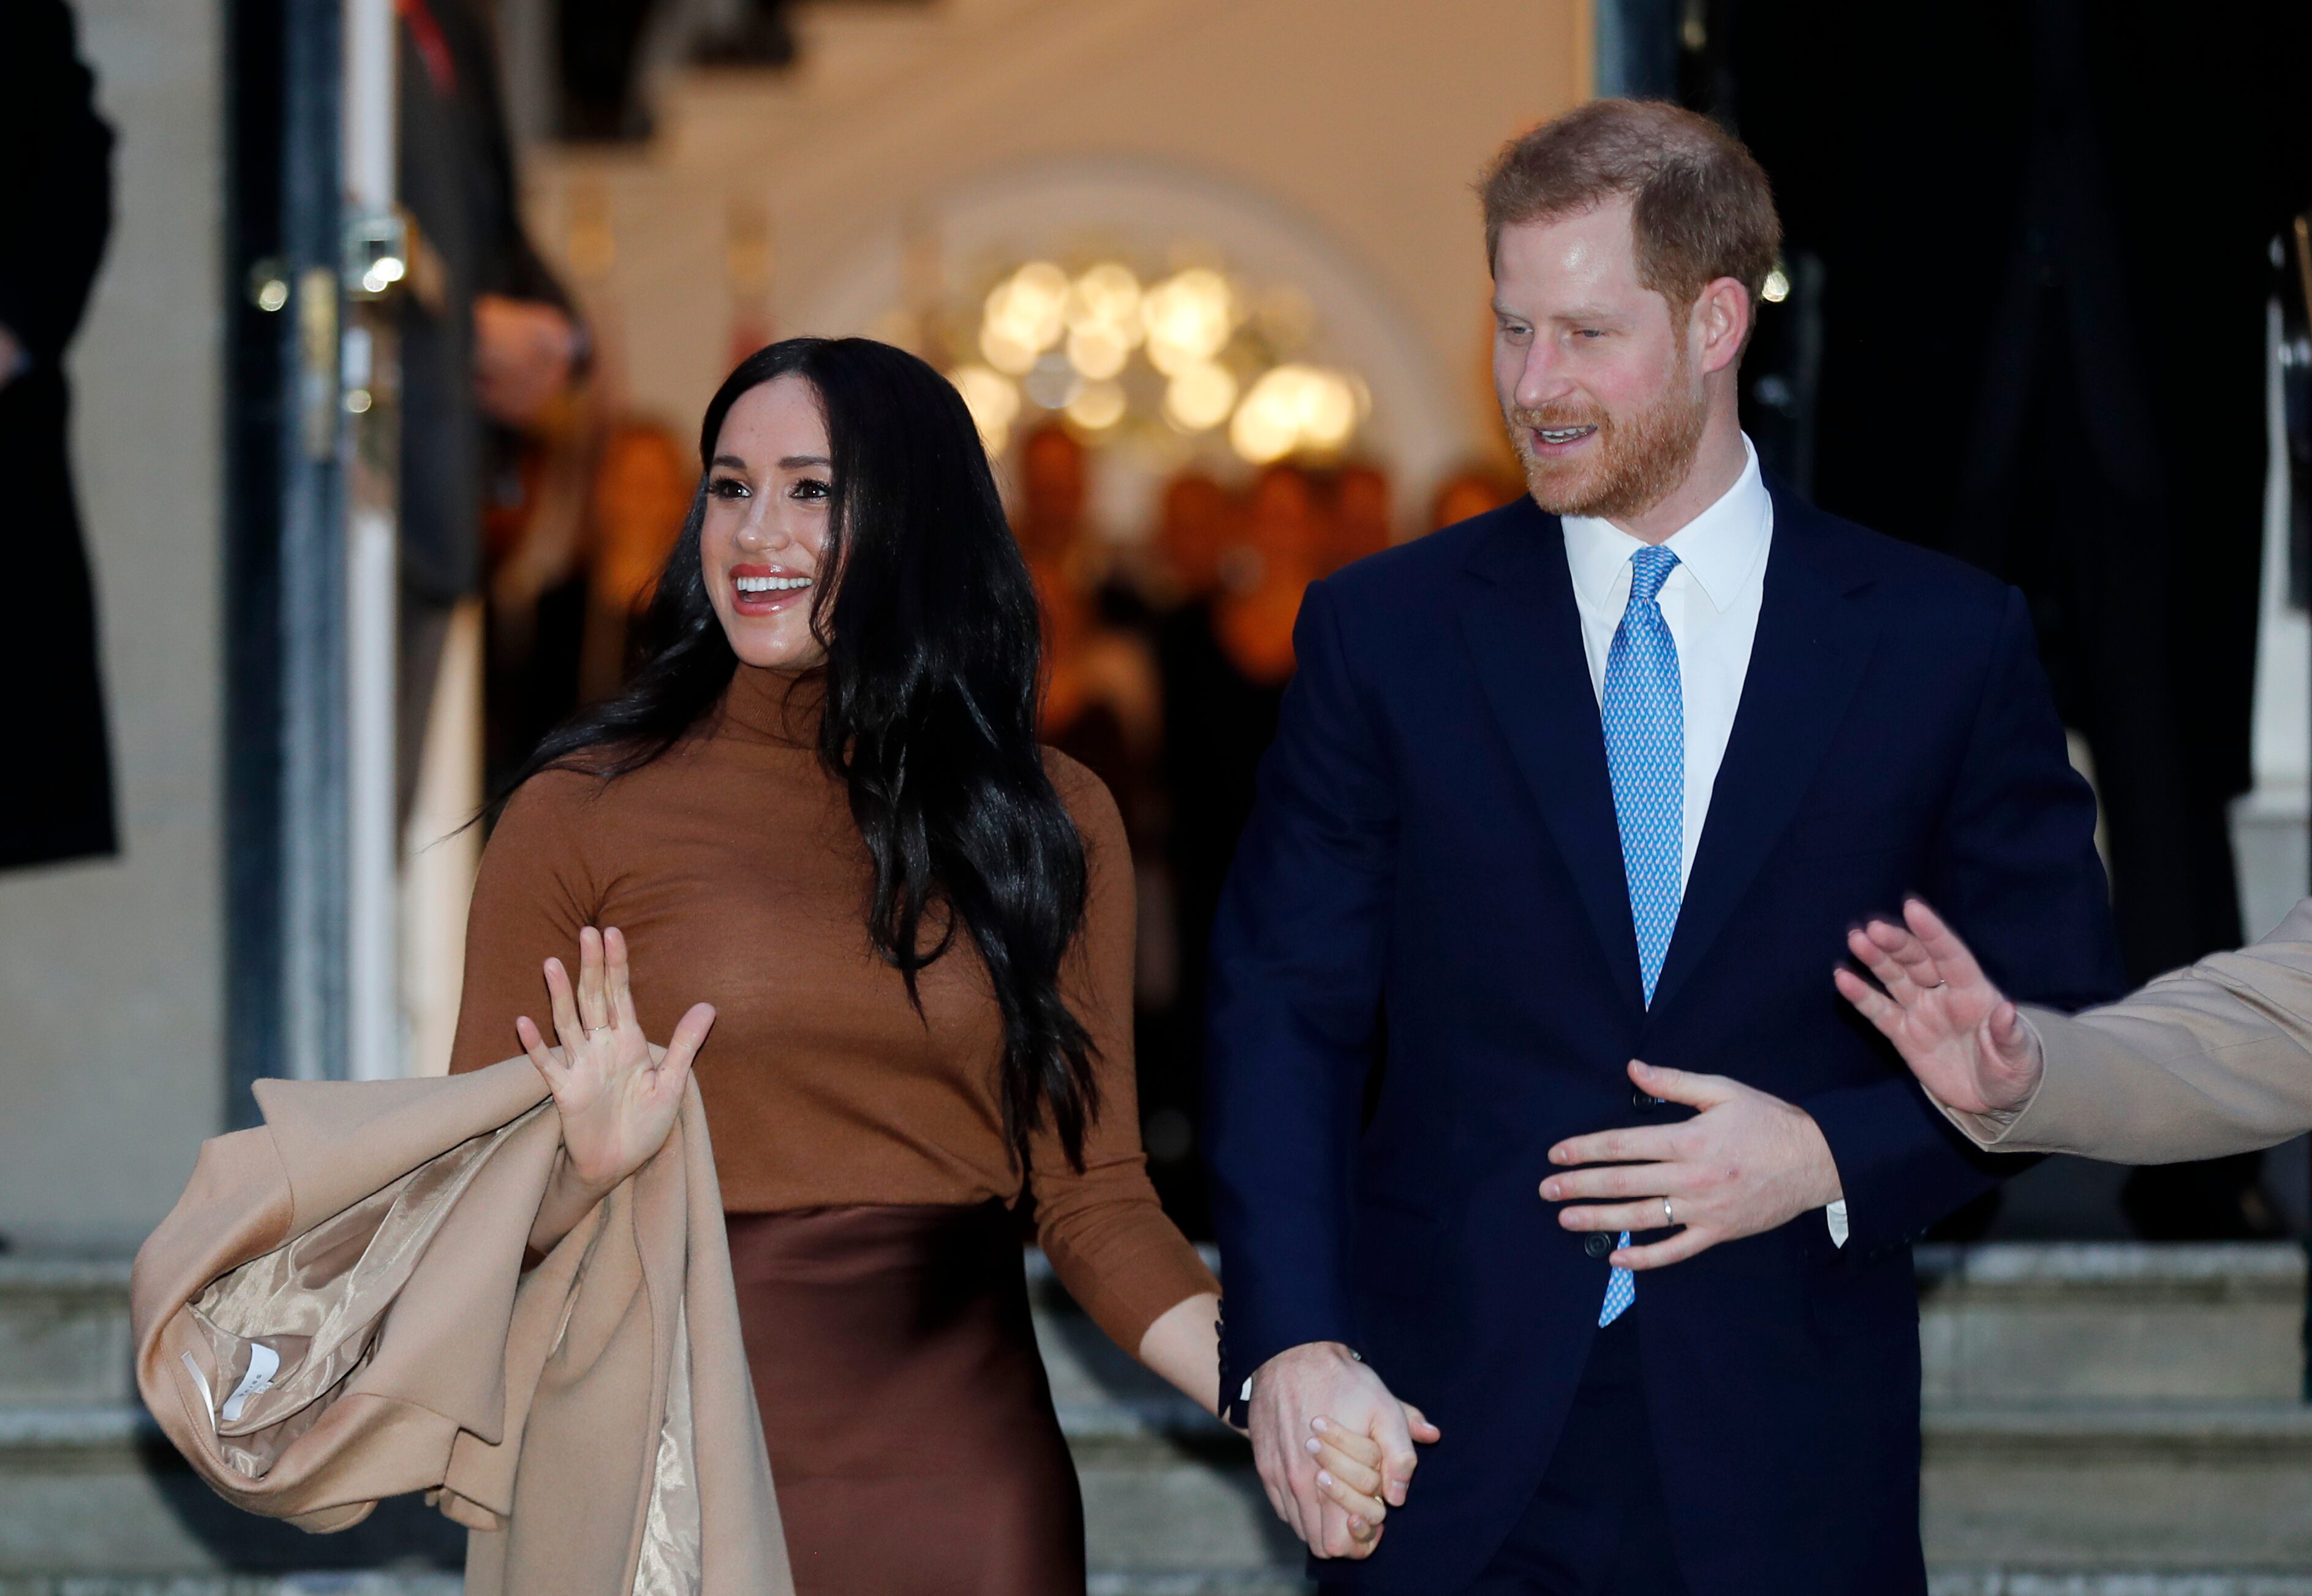 Prince Harry, Meghan Markle reveal new media relations policy in lieu of royal family's current plan - www.foxnews.com